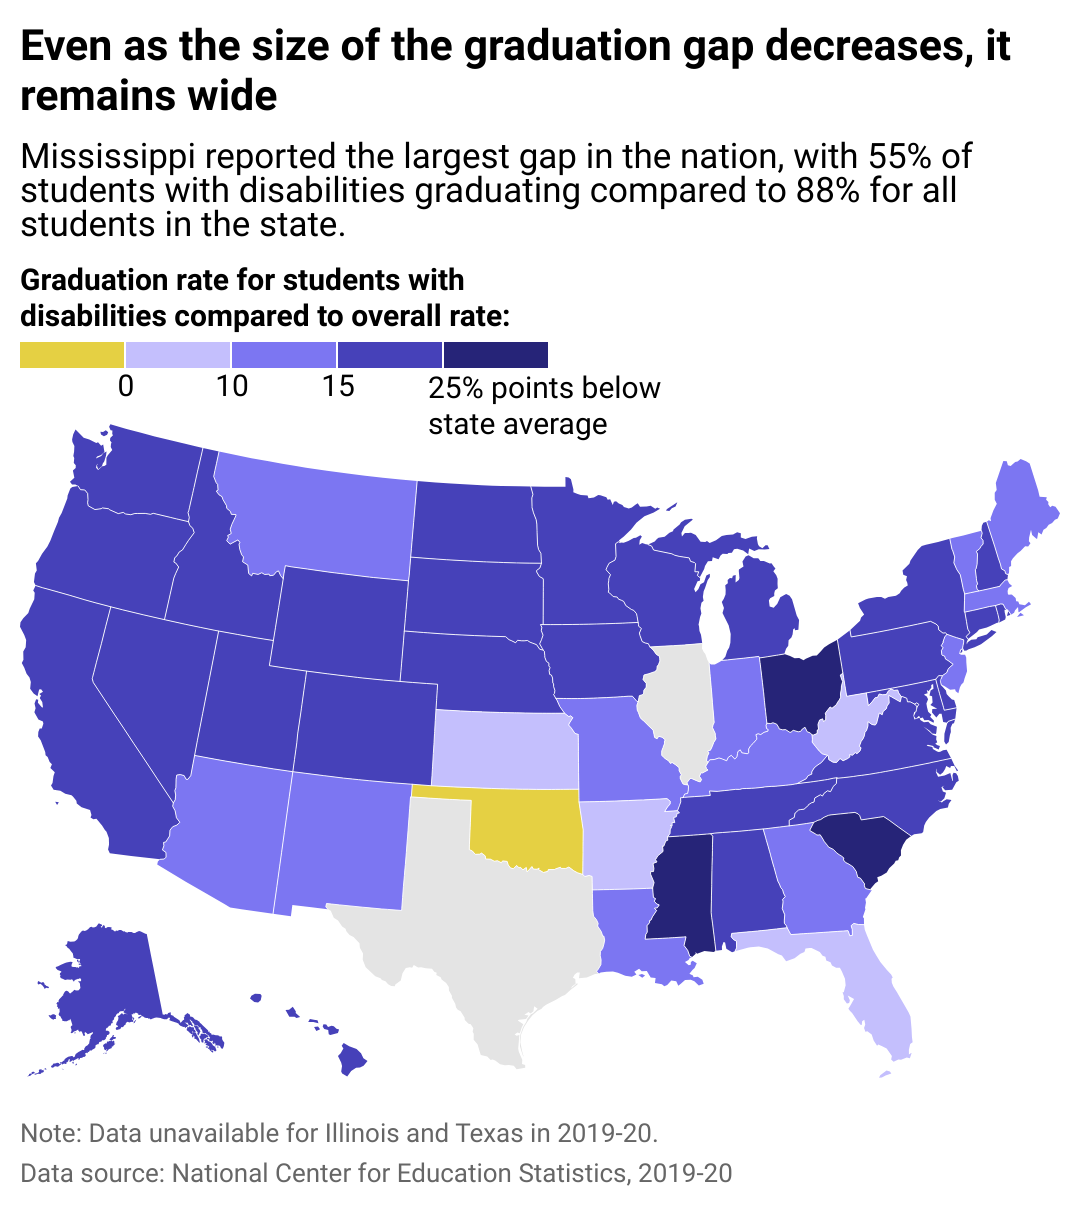 Map showing that even as the size of the graduation gap decreases, it remains wide. Mississippi reported the largest gap in the nation, with 55% of students with disabilities graduating compared to 88% for all students in the state.